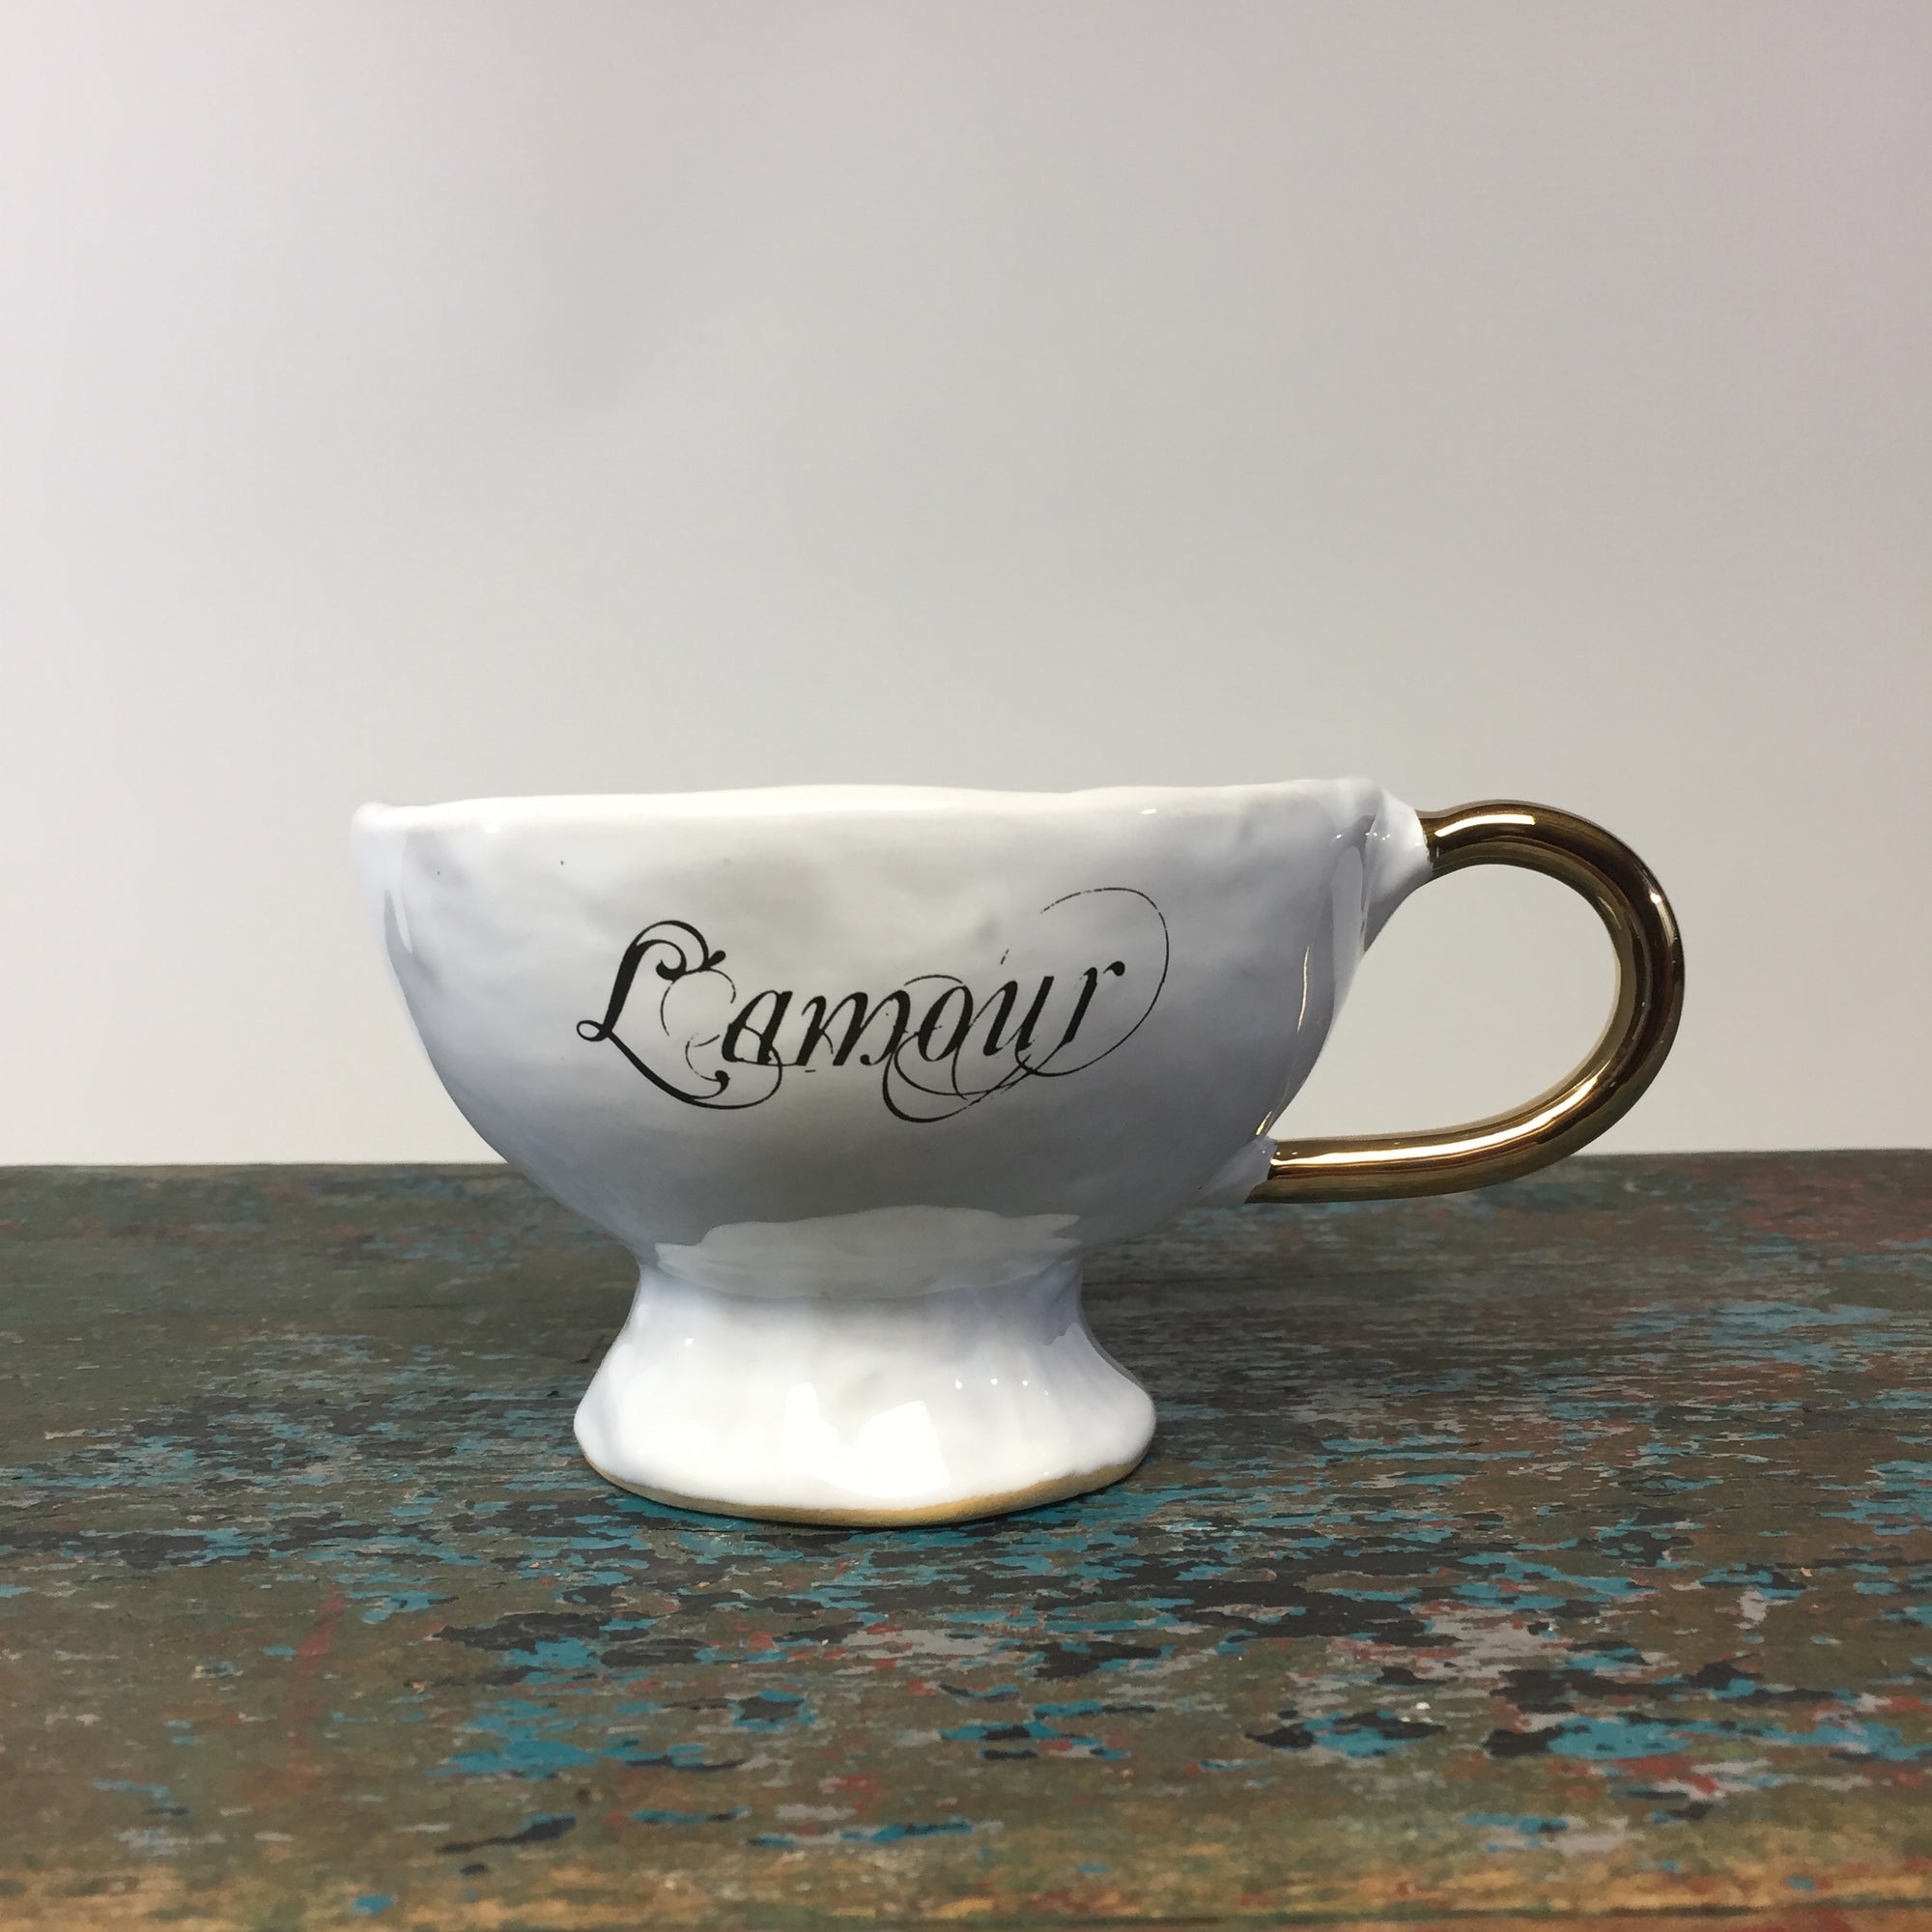 Kuhn Keramik L'amour 'Glam' Office Coffee Cup